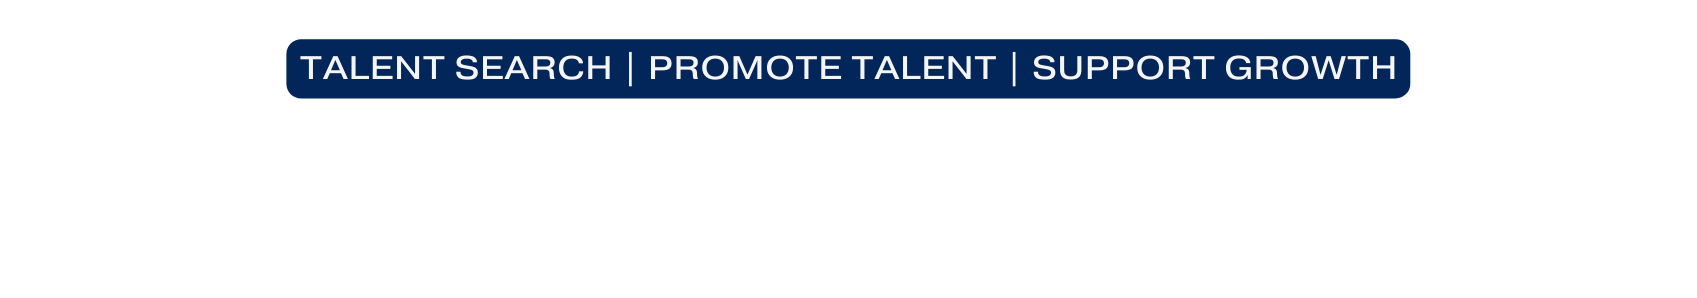 talent search promote talent support growth